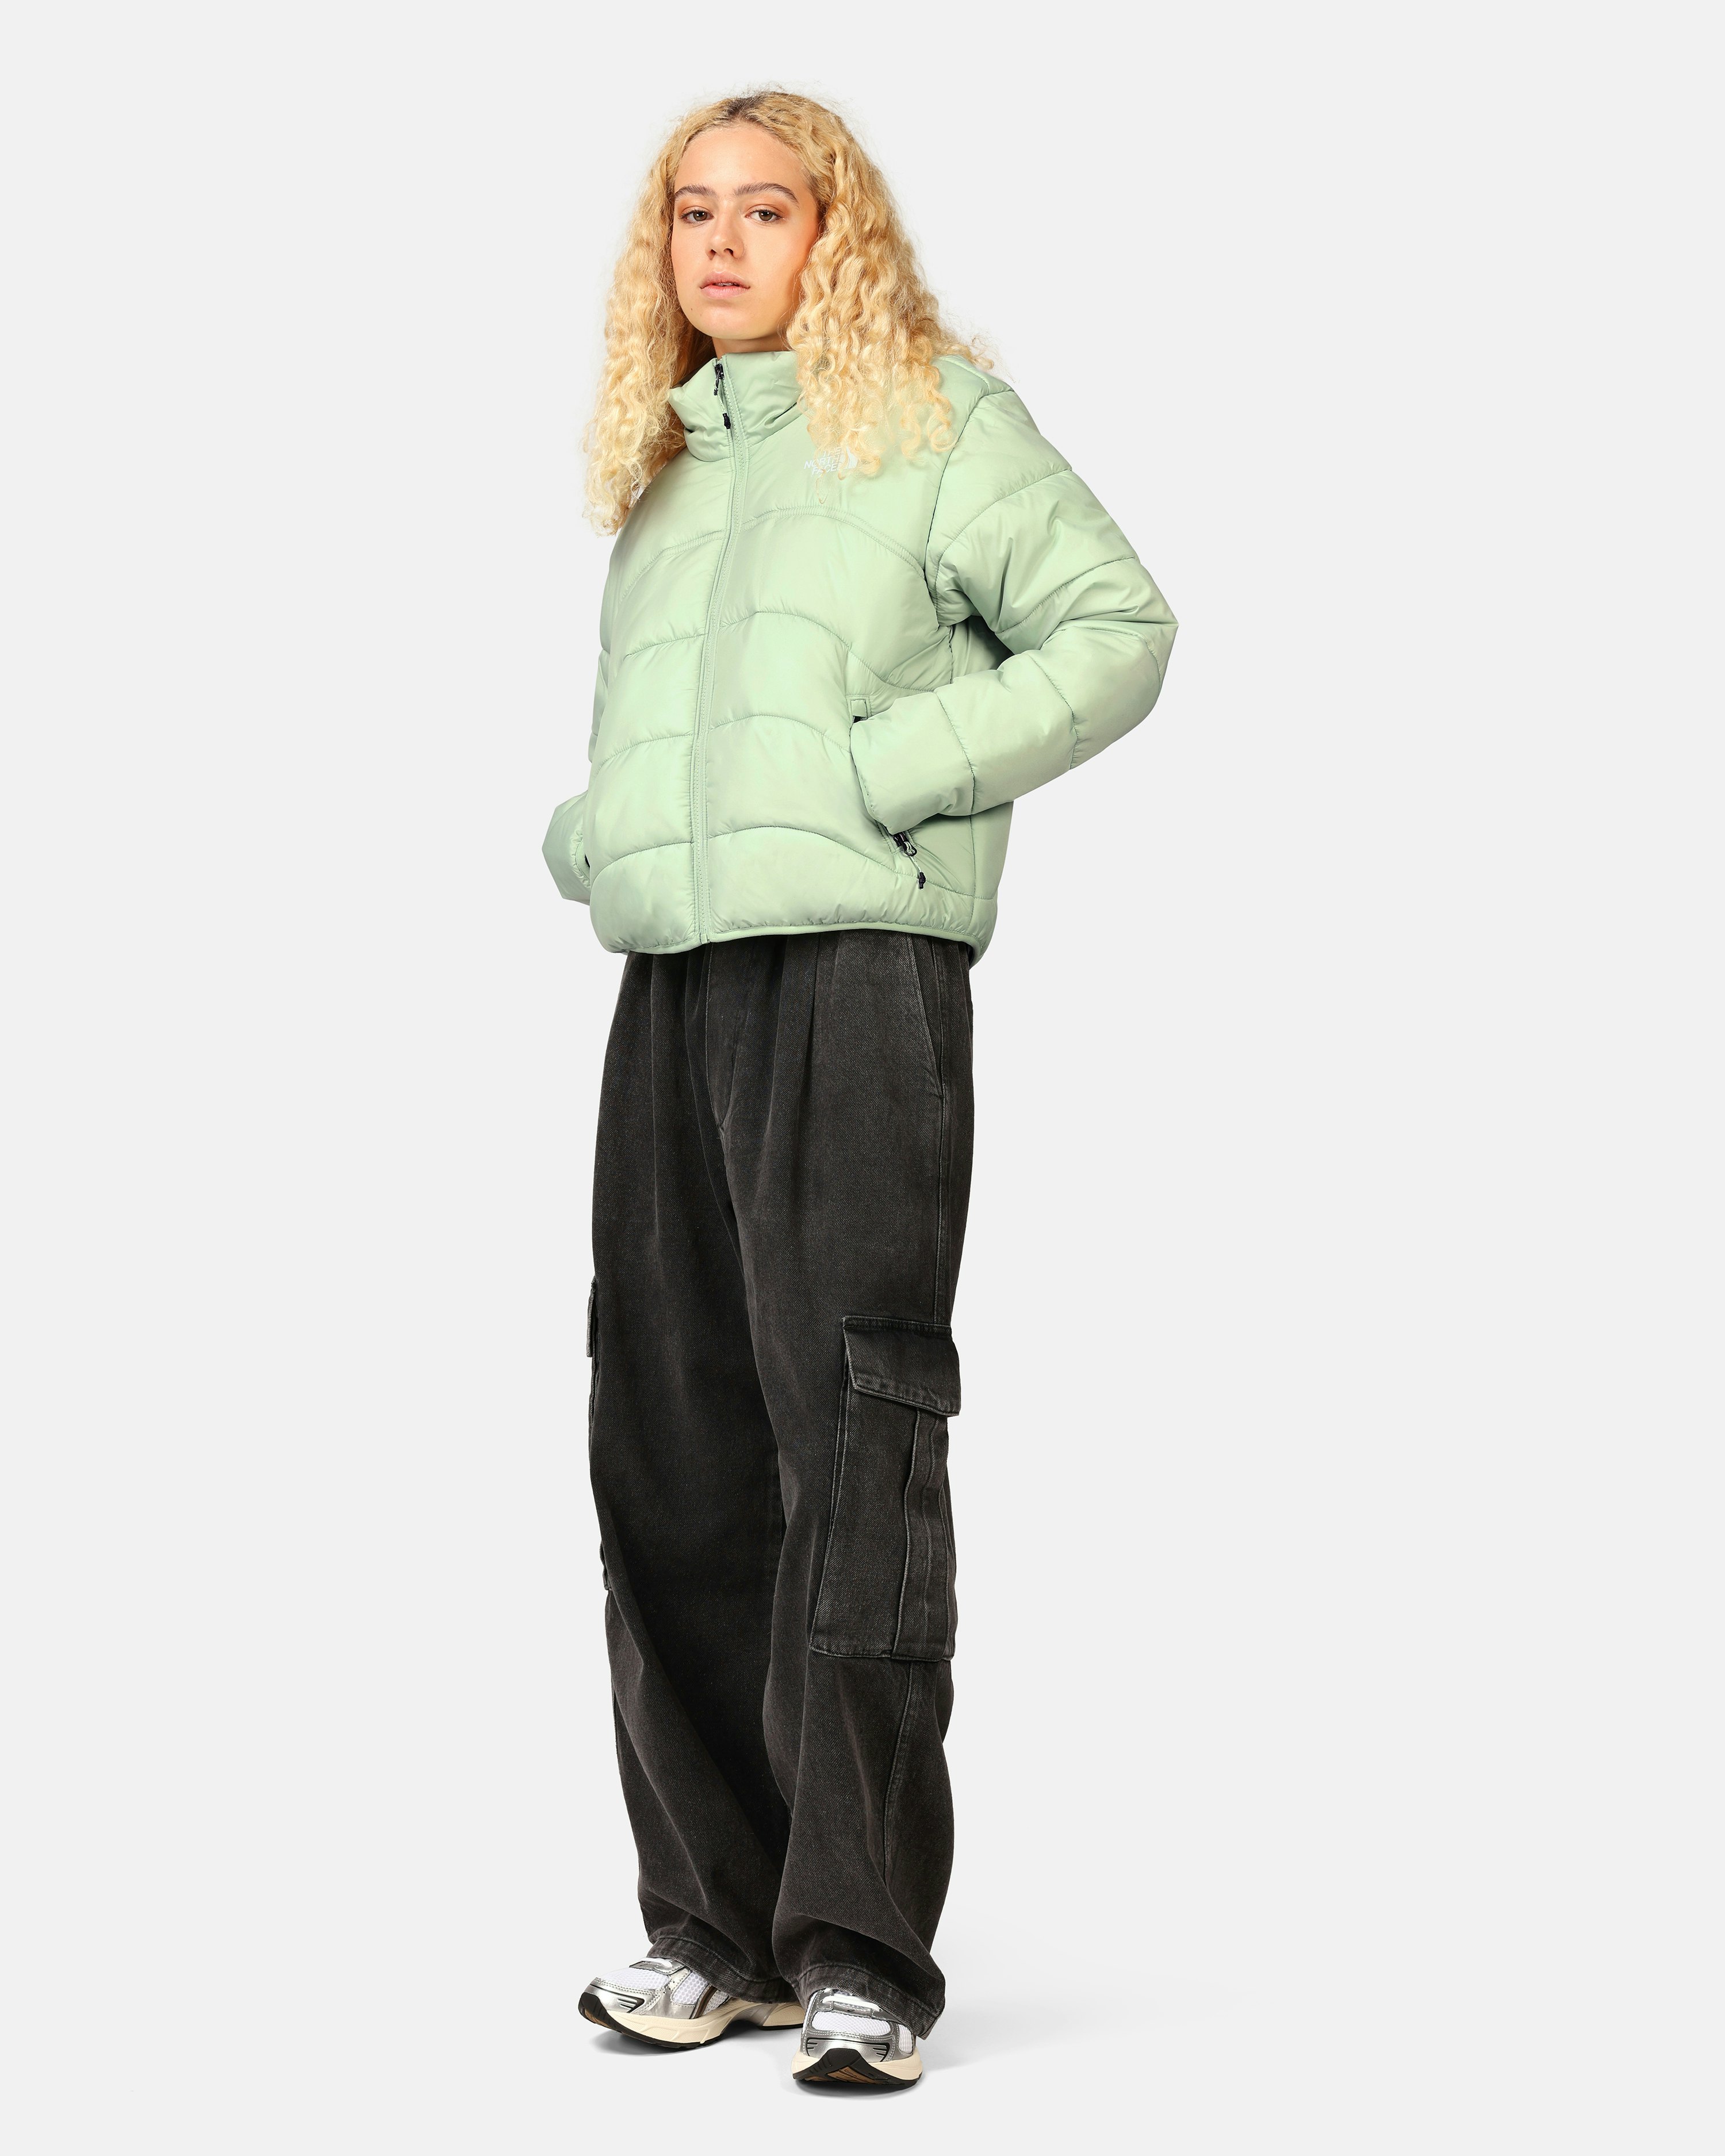 Buy The North Face Women's 2000 Synthetic Puffer Jacket from Next